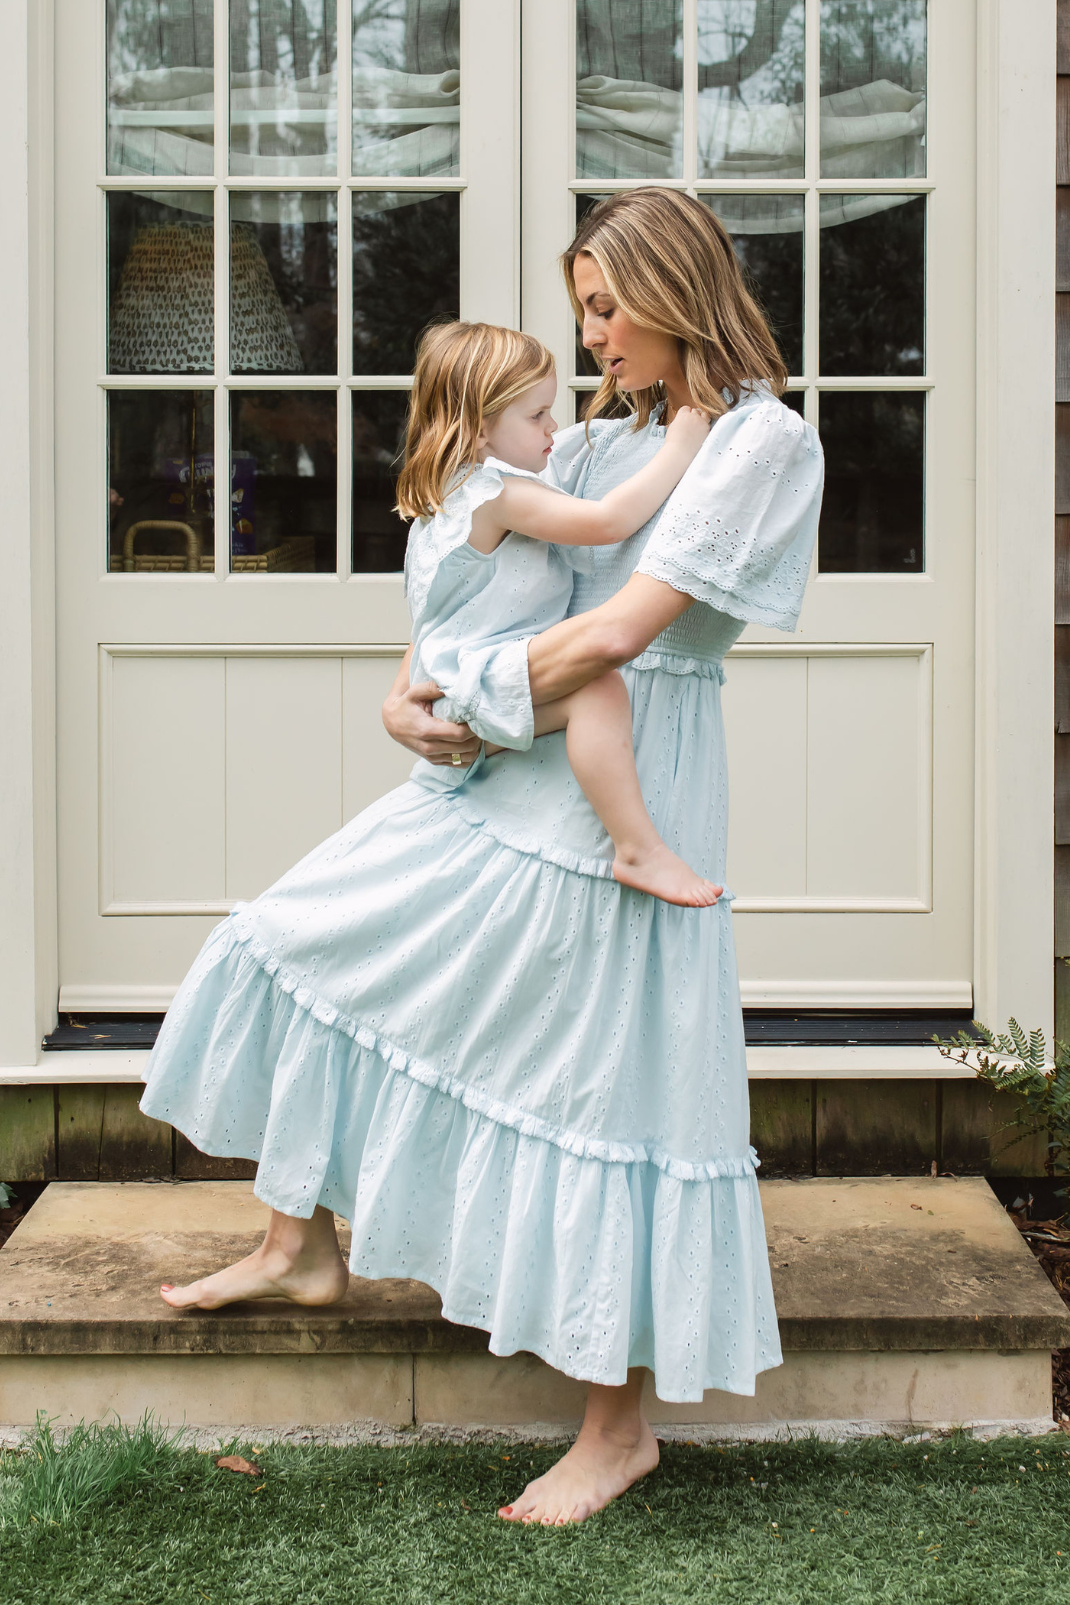 Icy Eyelet Mother & Daughter Set